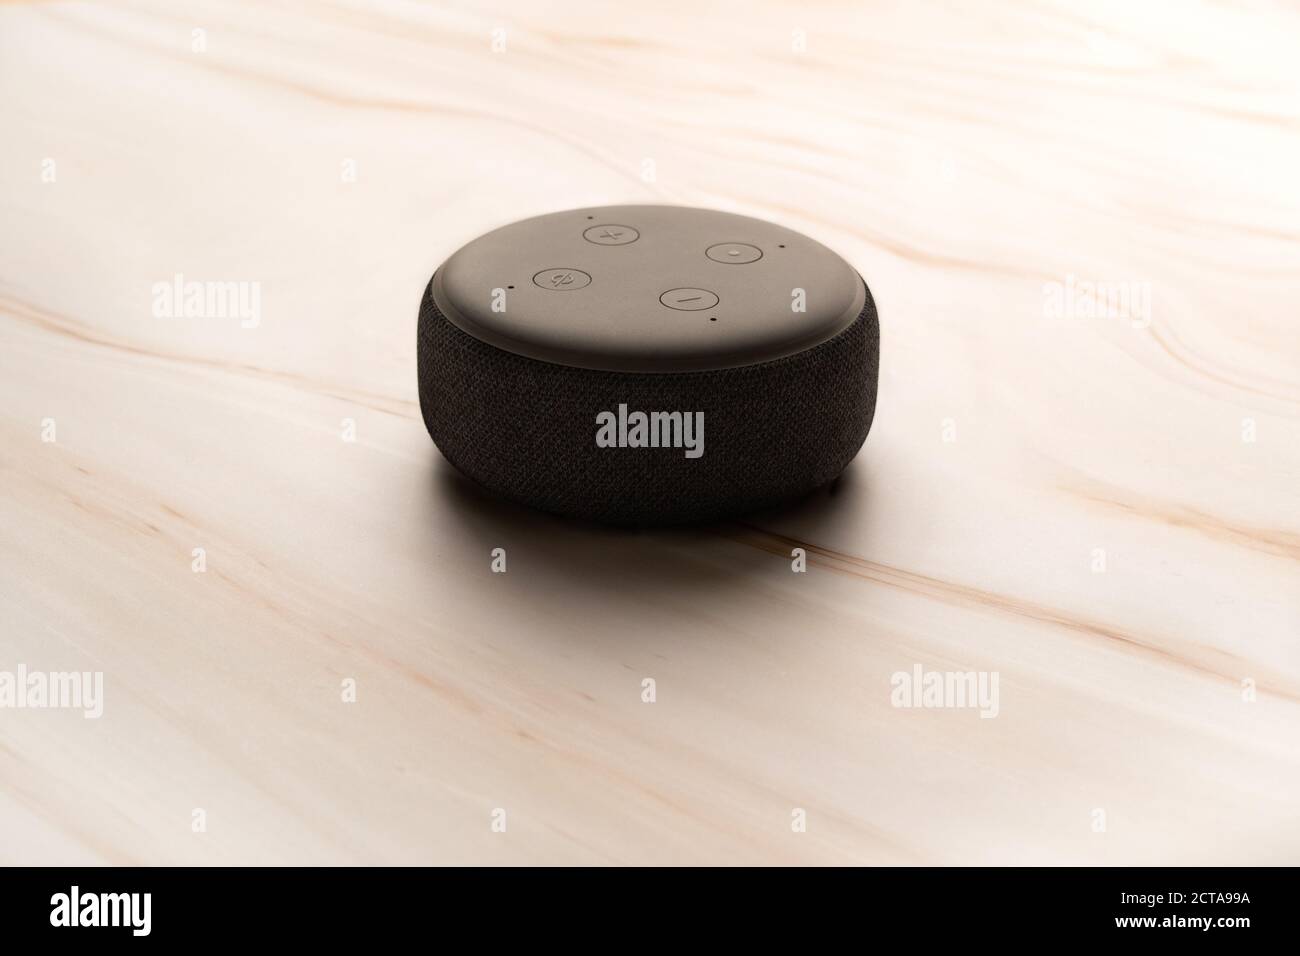 LONDON, UNITED KINGDOM - SEPTEMBER 20 2020: Close-up of an Amazon Echo Dot, the virtual assistant speaker, with a modern light marble background. Stock Photo